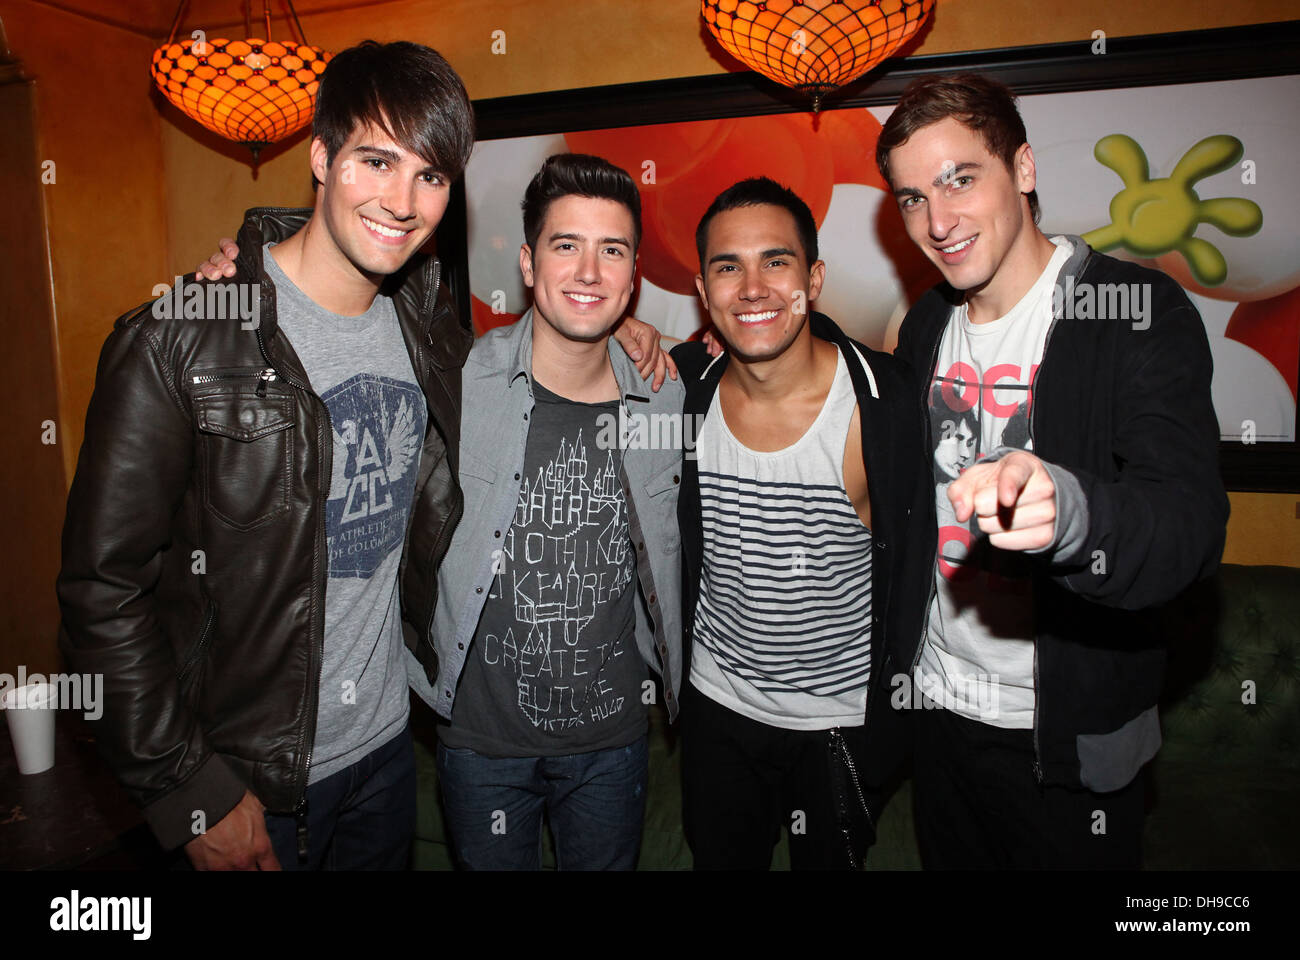 Kendall Schmidt Carlos Pena Logan Henderson James Maslow of Big Time Rush Nickelodeon's Upfront 2012 at Avalon Hollywood Stock Photo